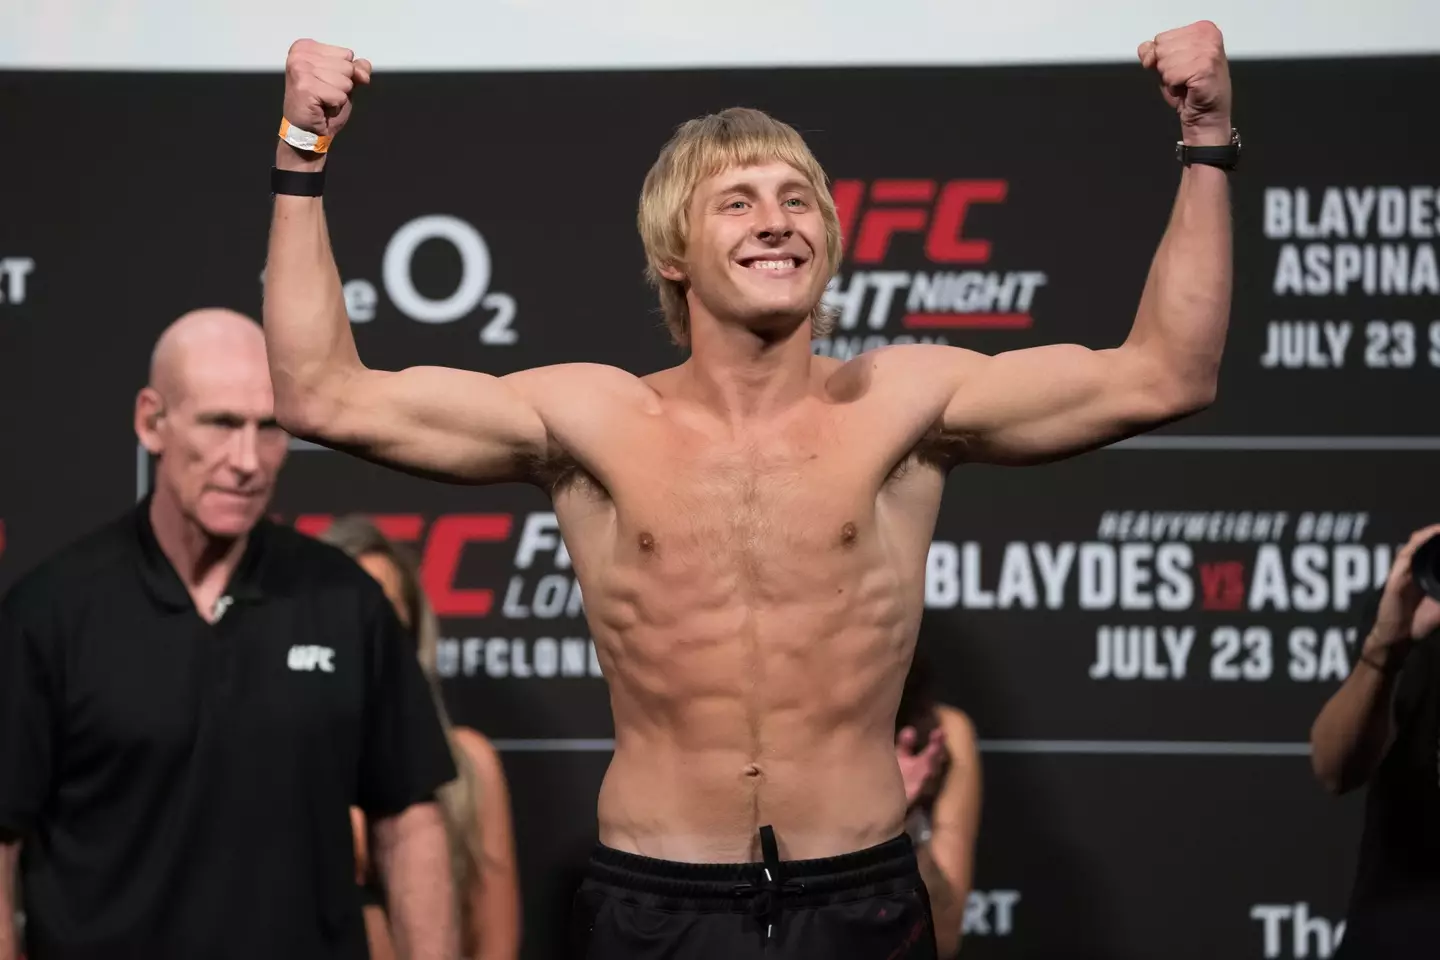 Pimblett posing on the scale during the UFC Fight Night last weekend.